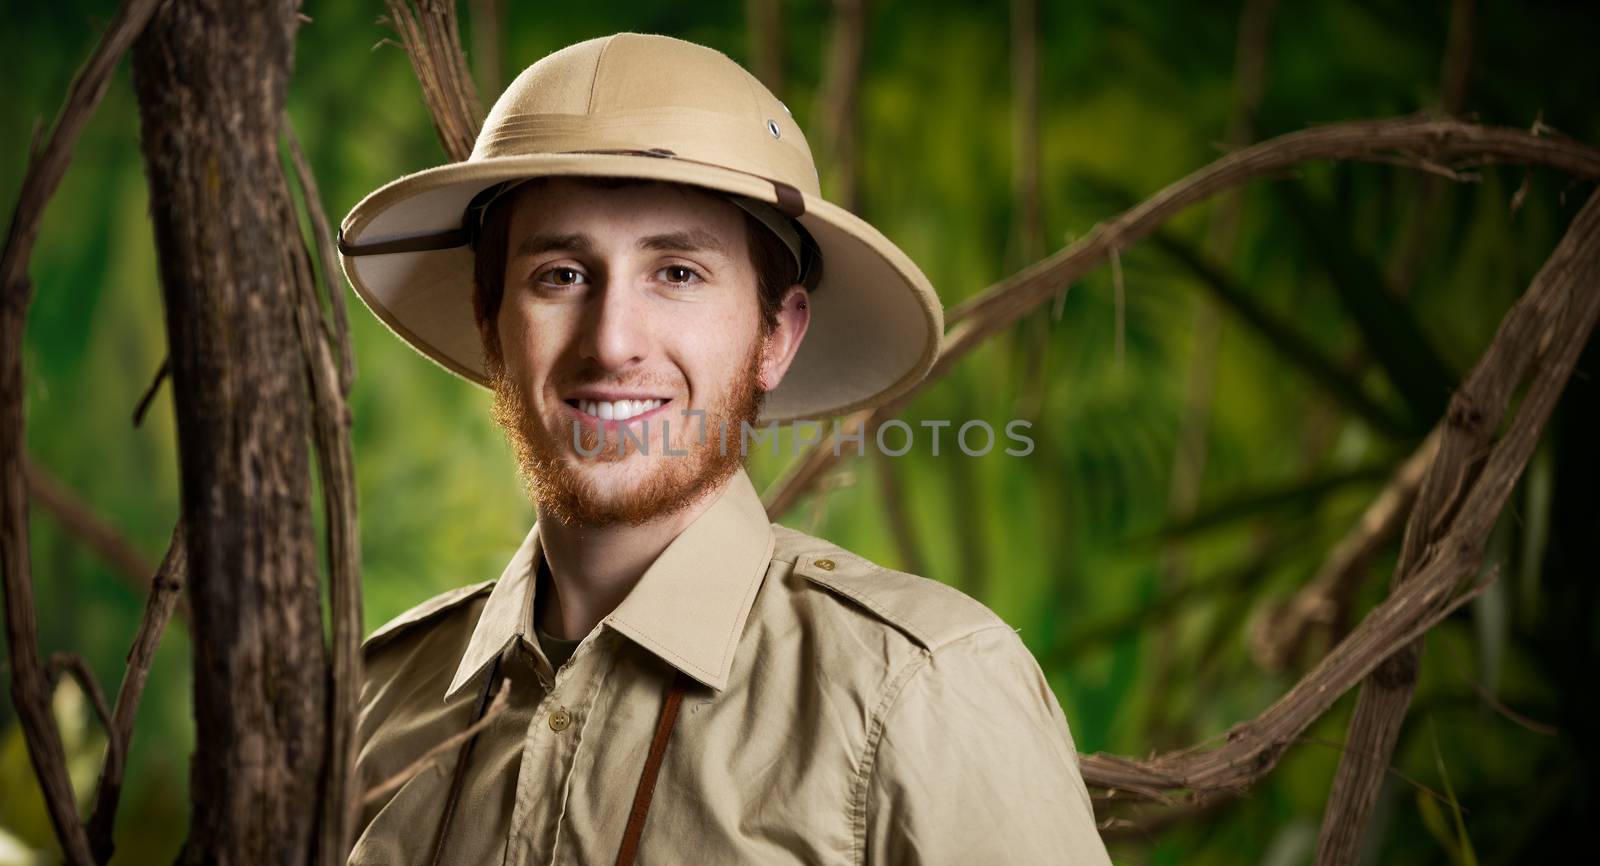 Young confident explorer in the jungle with pith hat smiling at camera.